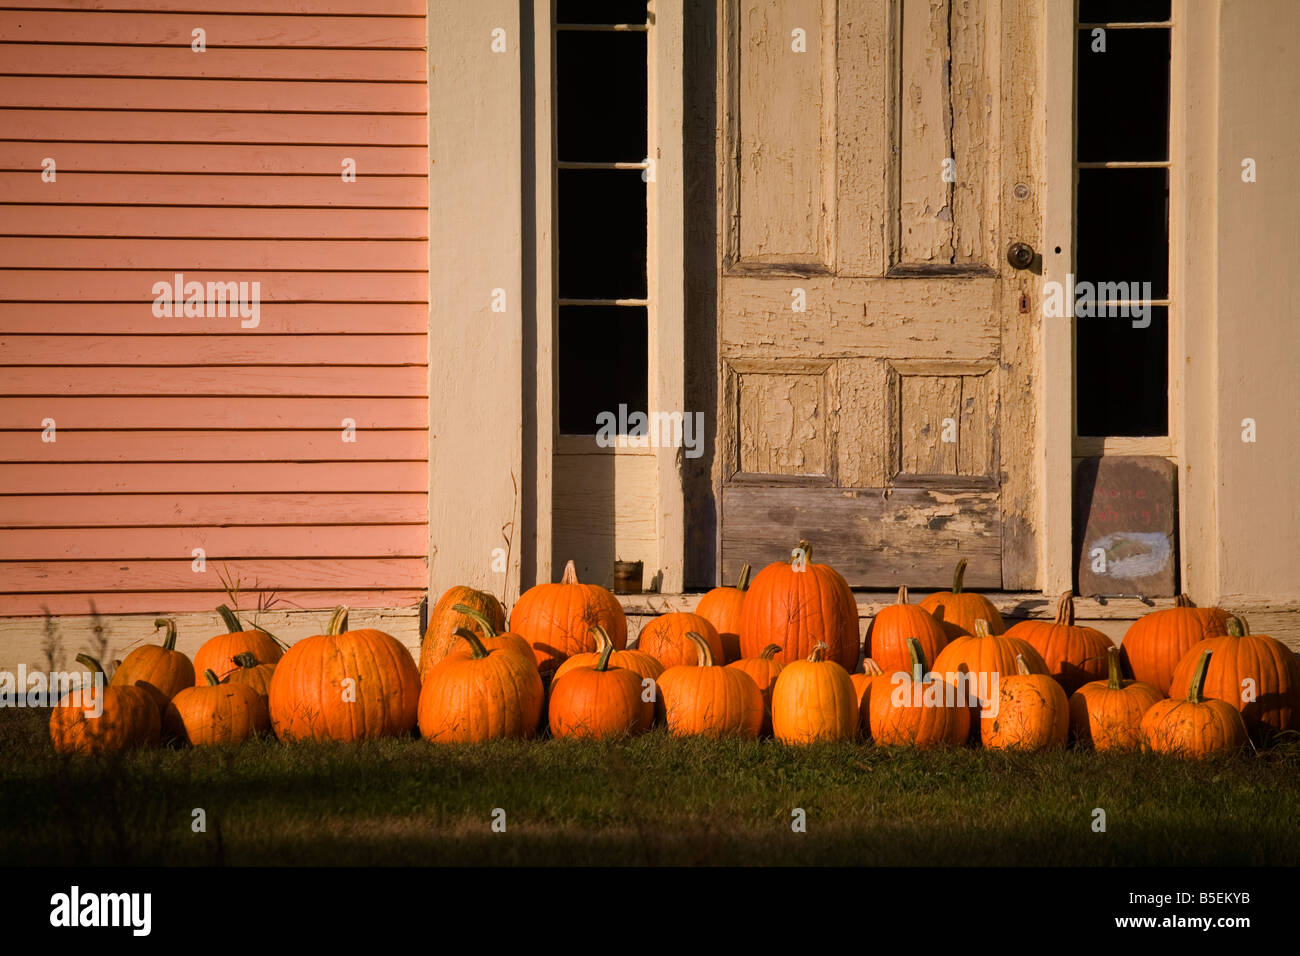 A group of pumpkins of various sizes are arranged on the grass in front of the front door of a country home. Stock Photo